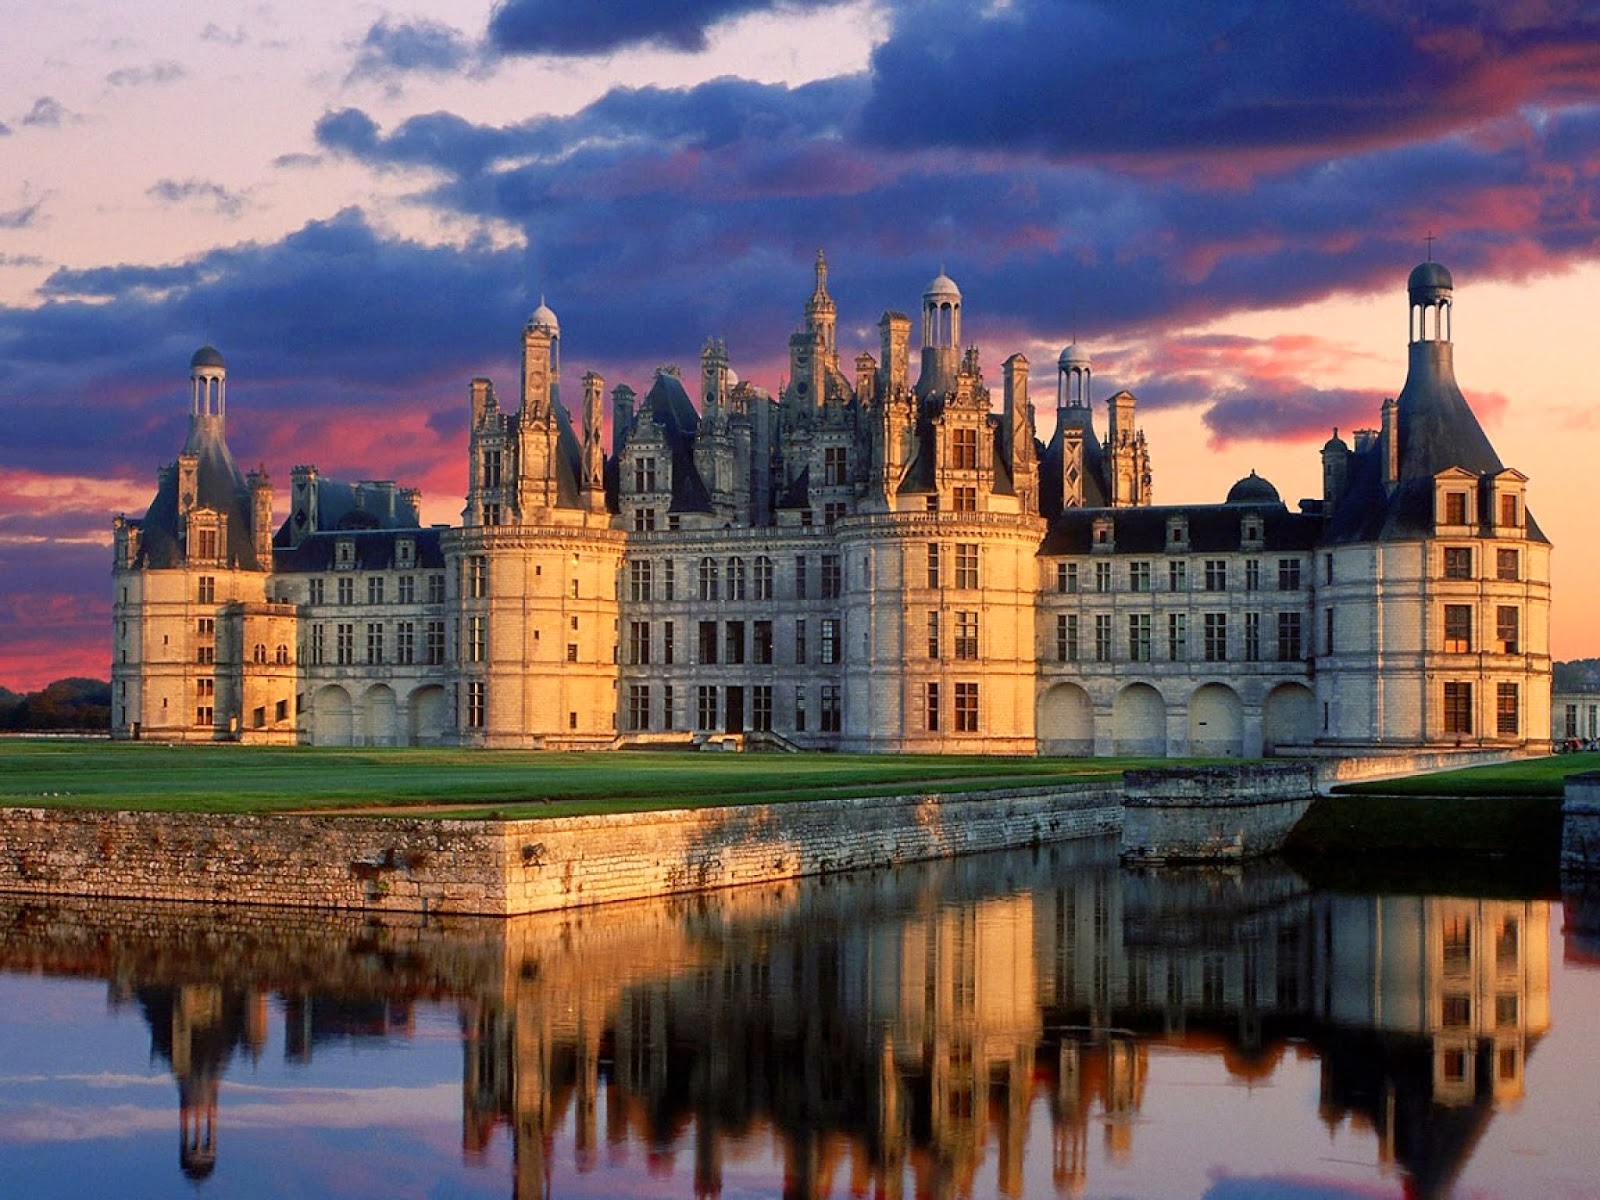 Château de Chambord Wikipedia the free encyclopedia - pictures of chateau de chambord